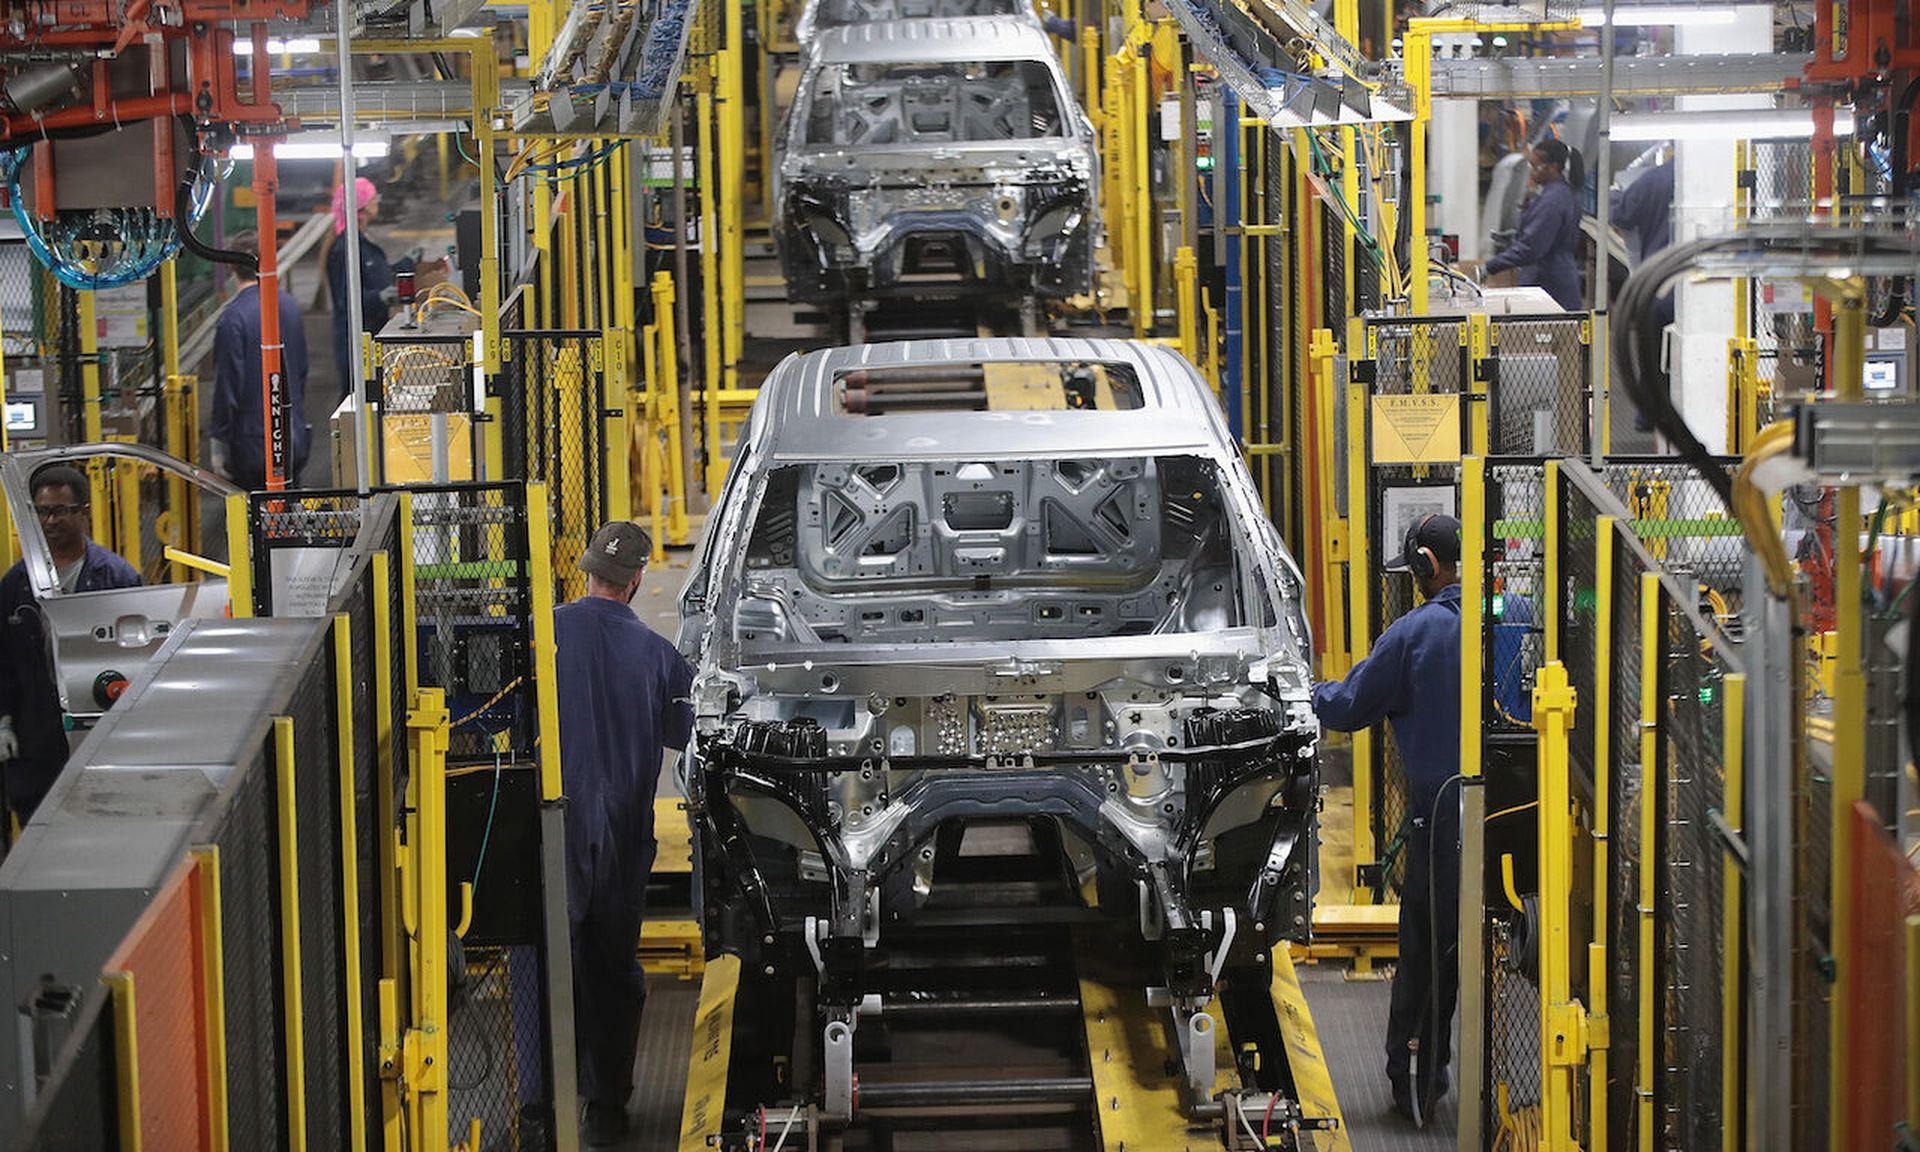 Workers assemble Ford vehicles at the Chicago Assembly Plant on June 24, 2019 in Chicago, Illinois. Ford recently invested $1 billion to upgrade the facility where they build the Ford Explorer, Police Interceptor Utility and the Lincoln Aviator.  (Photo by Scott Olson/Getty Images)